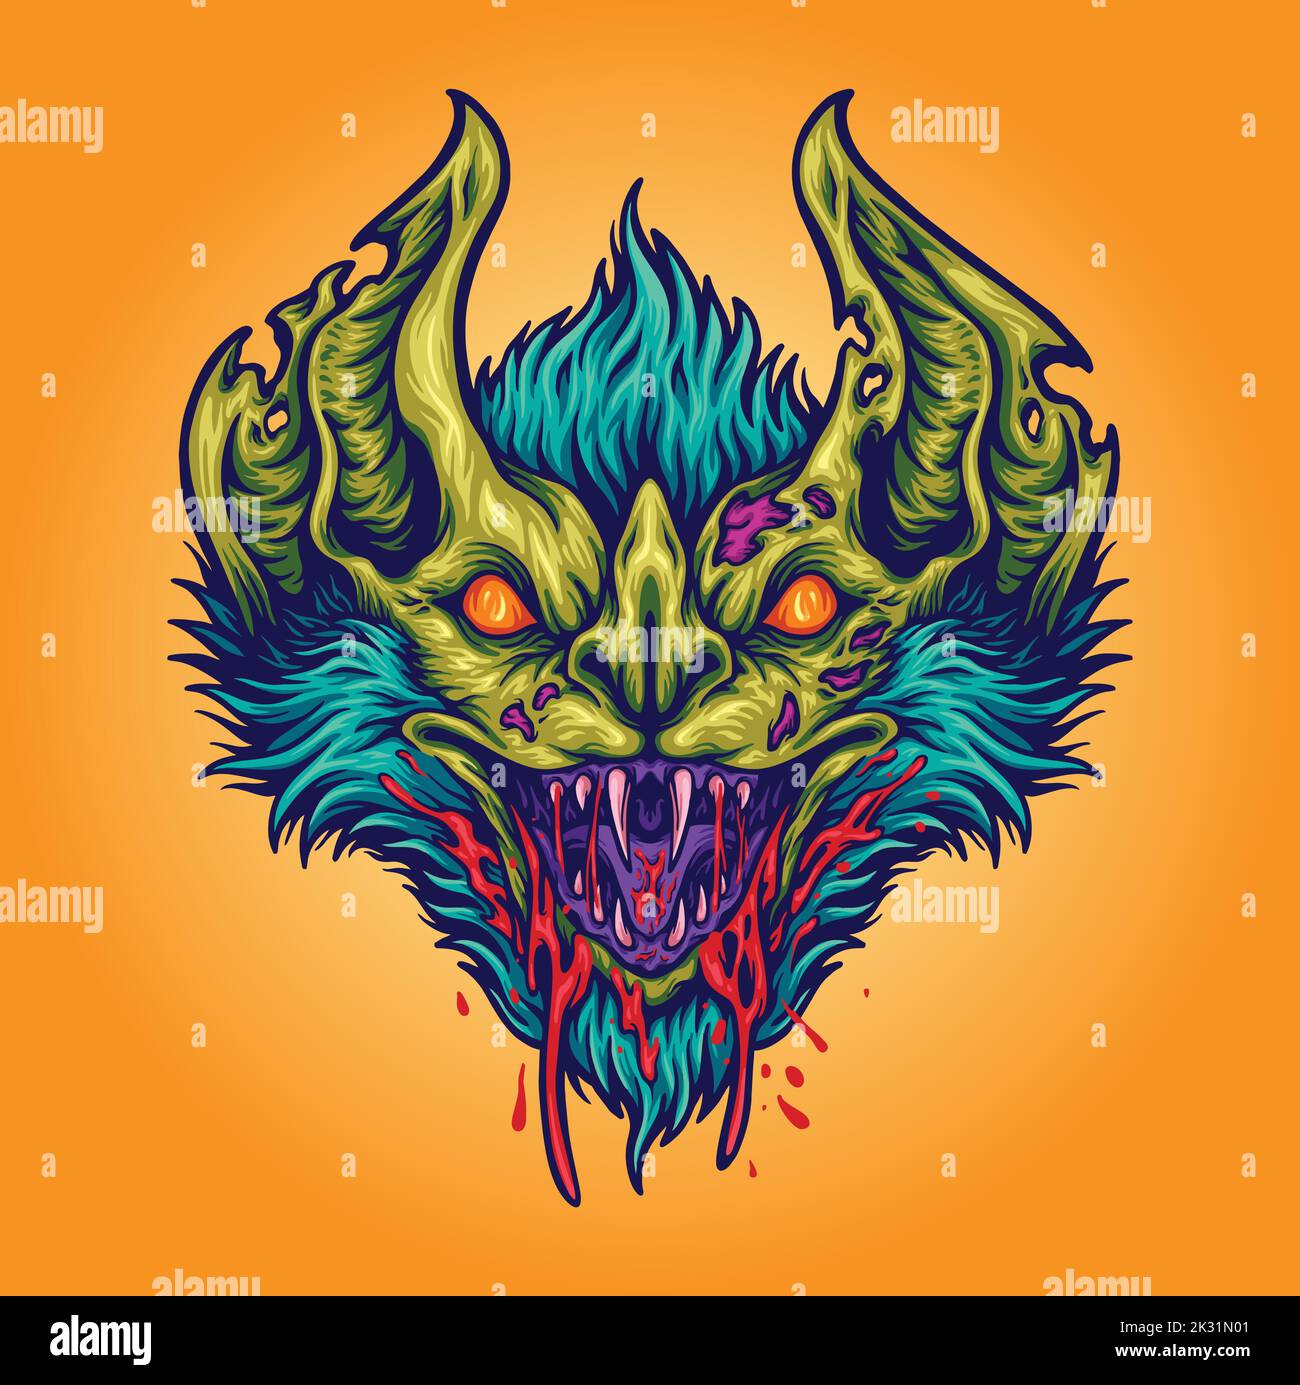 Scary bat head monster illustration vector illustrations for your work logo, merchandise t-shirt, stickers and label designs, poster, greeting cards Stock Vector